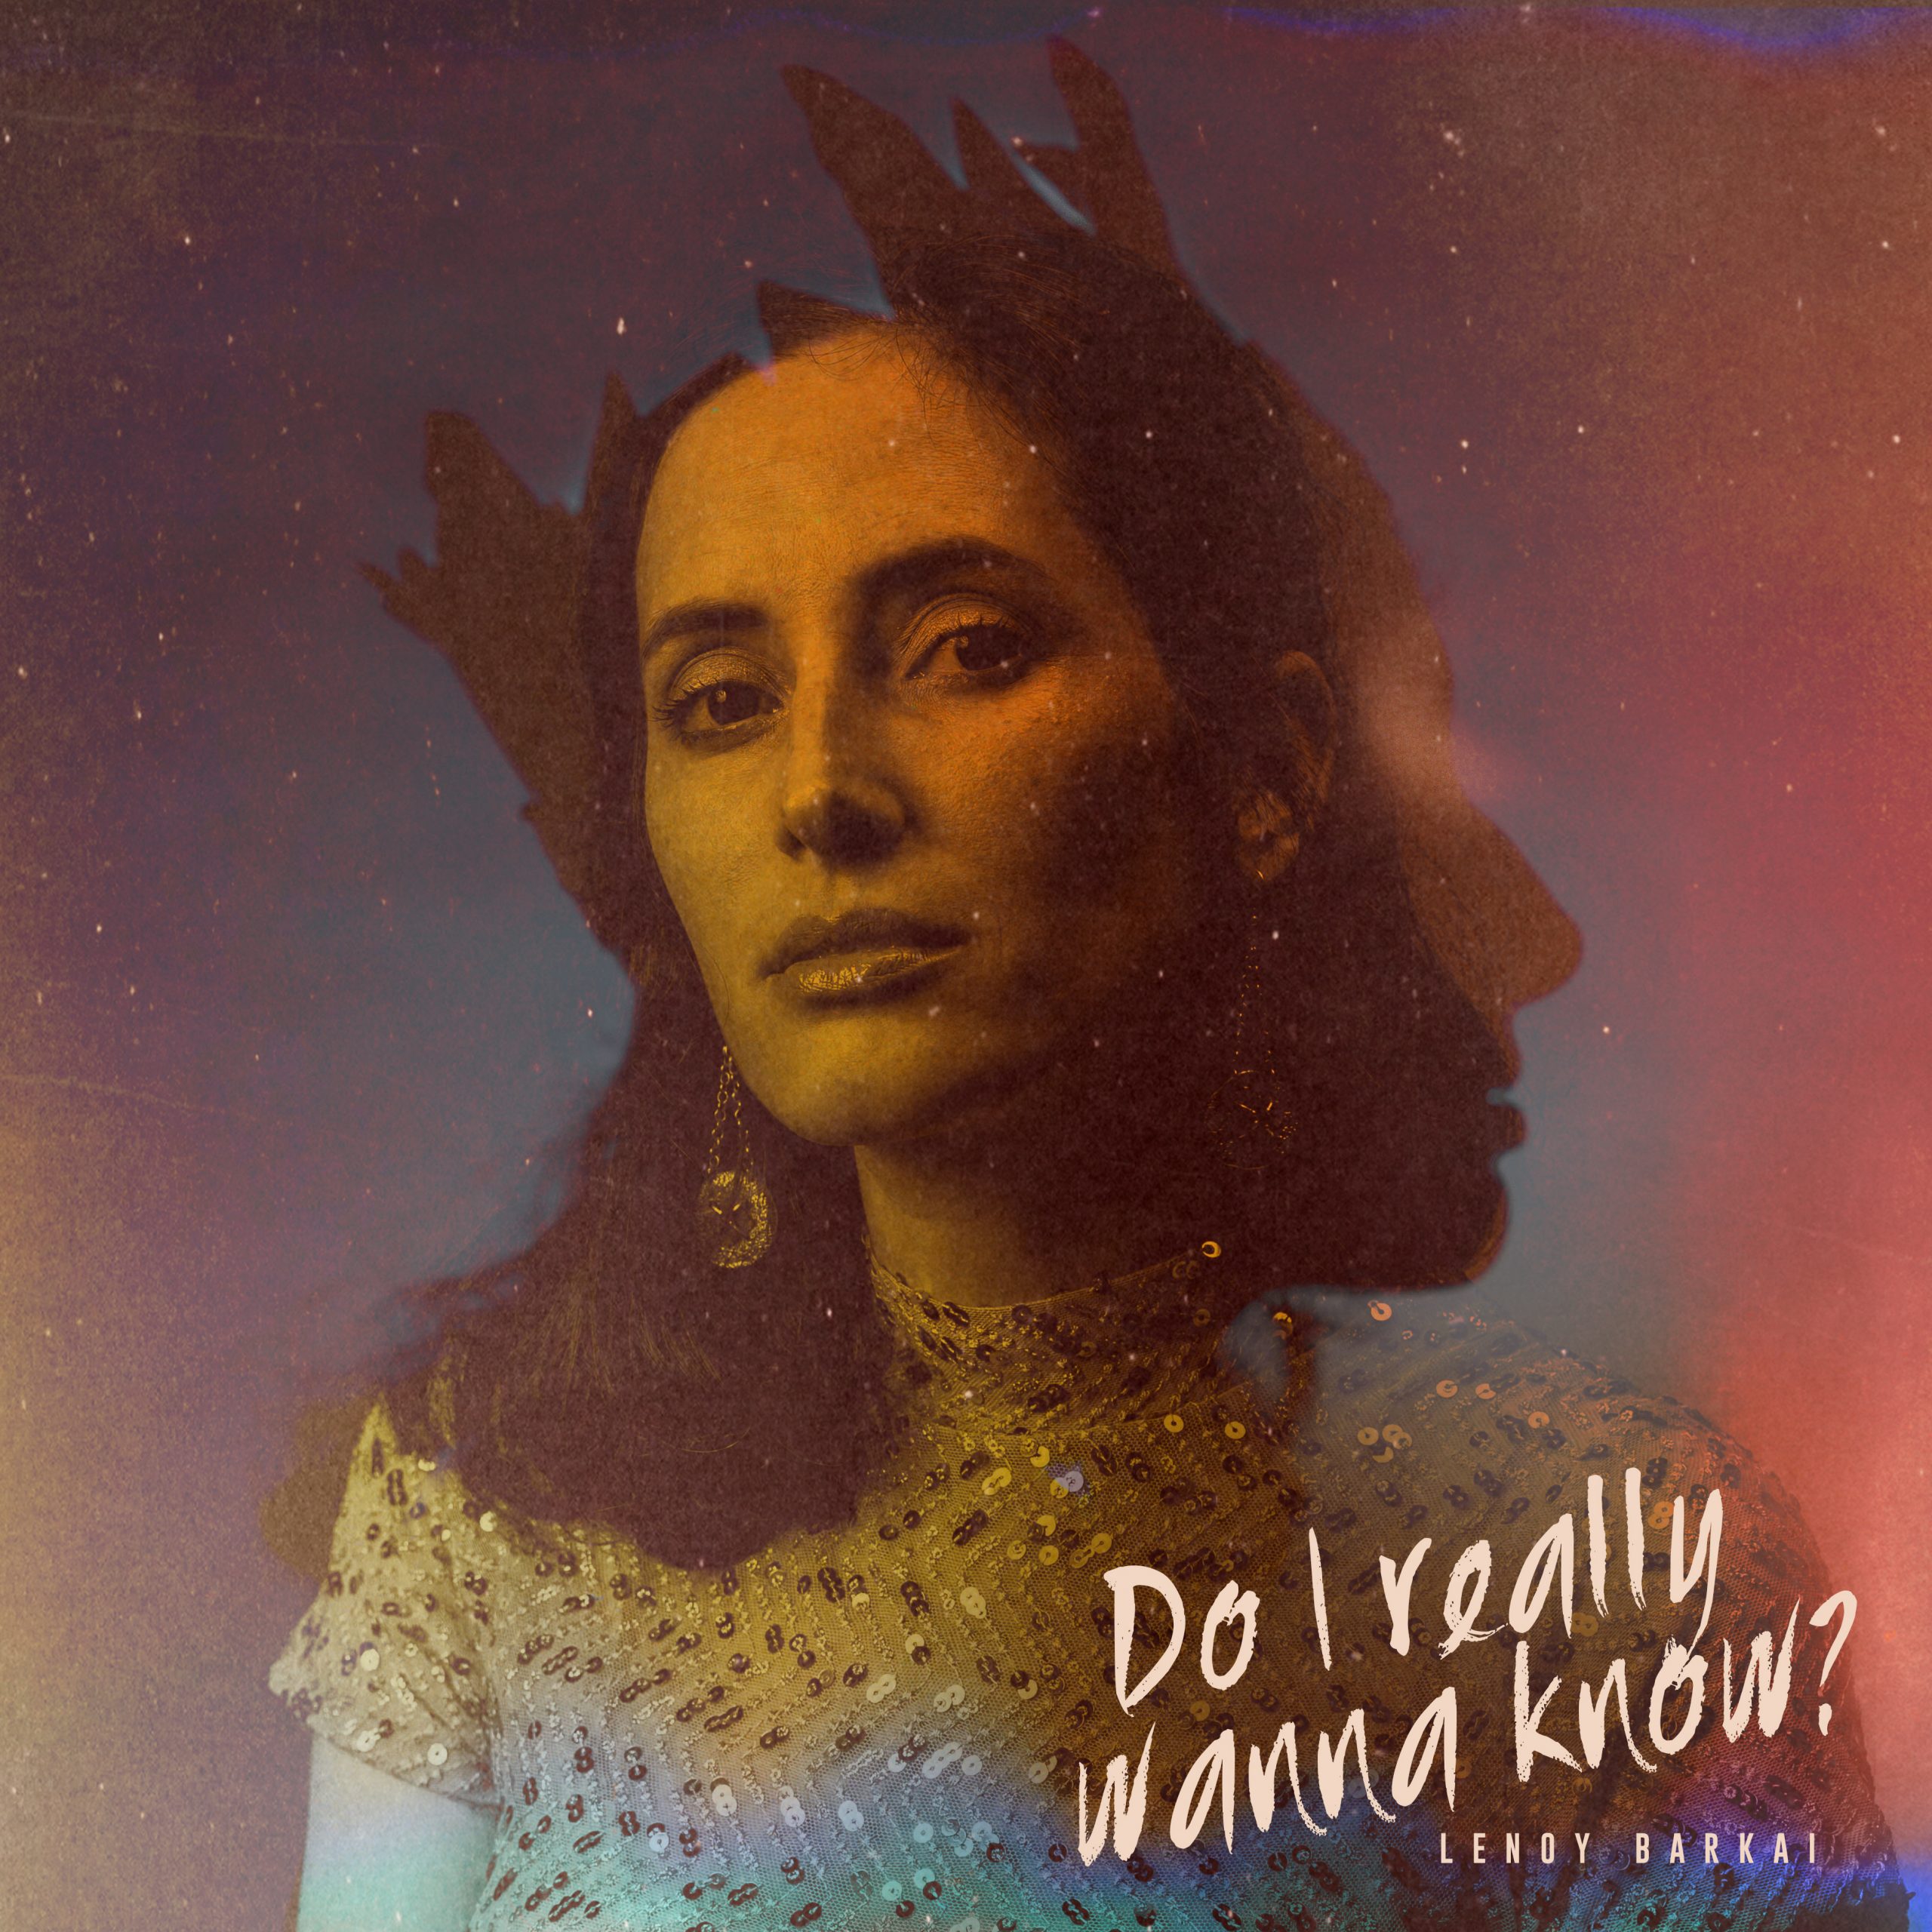 South Africa Premiere: Lenoy Barkai releases “Do I Really Wanna Know?” from her debut album ‘Paper Crown’.